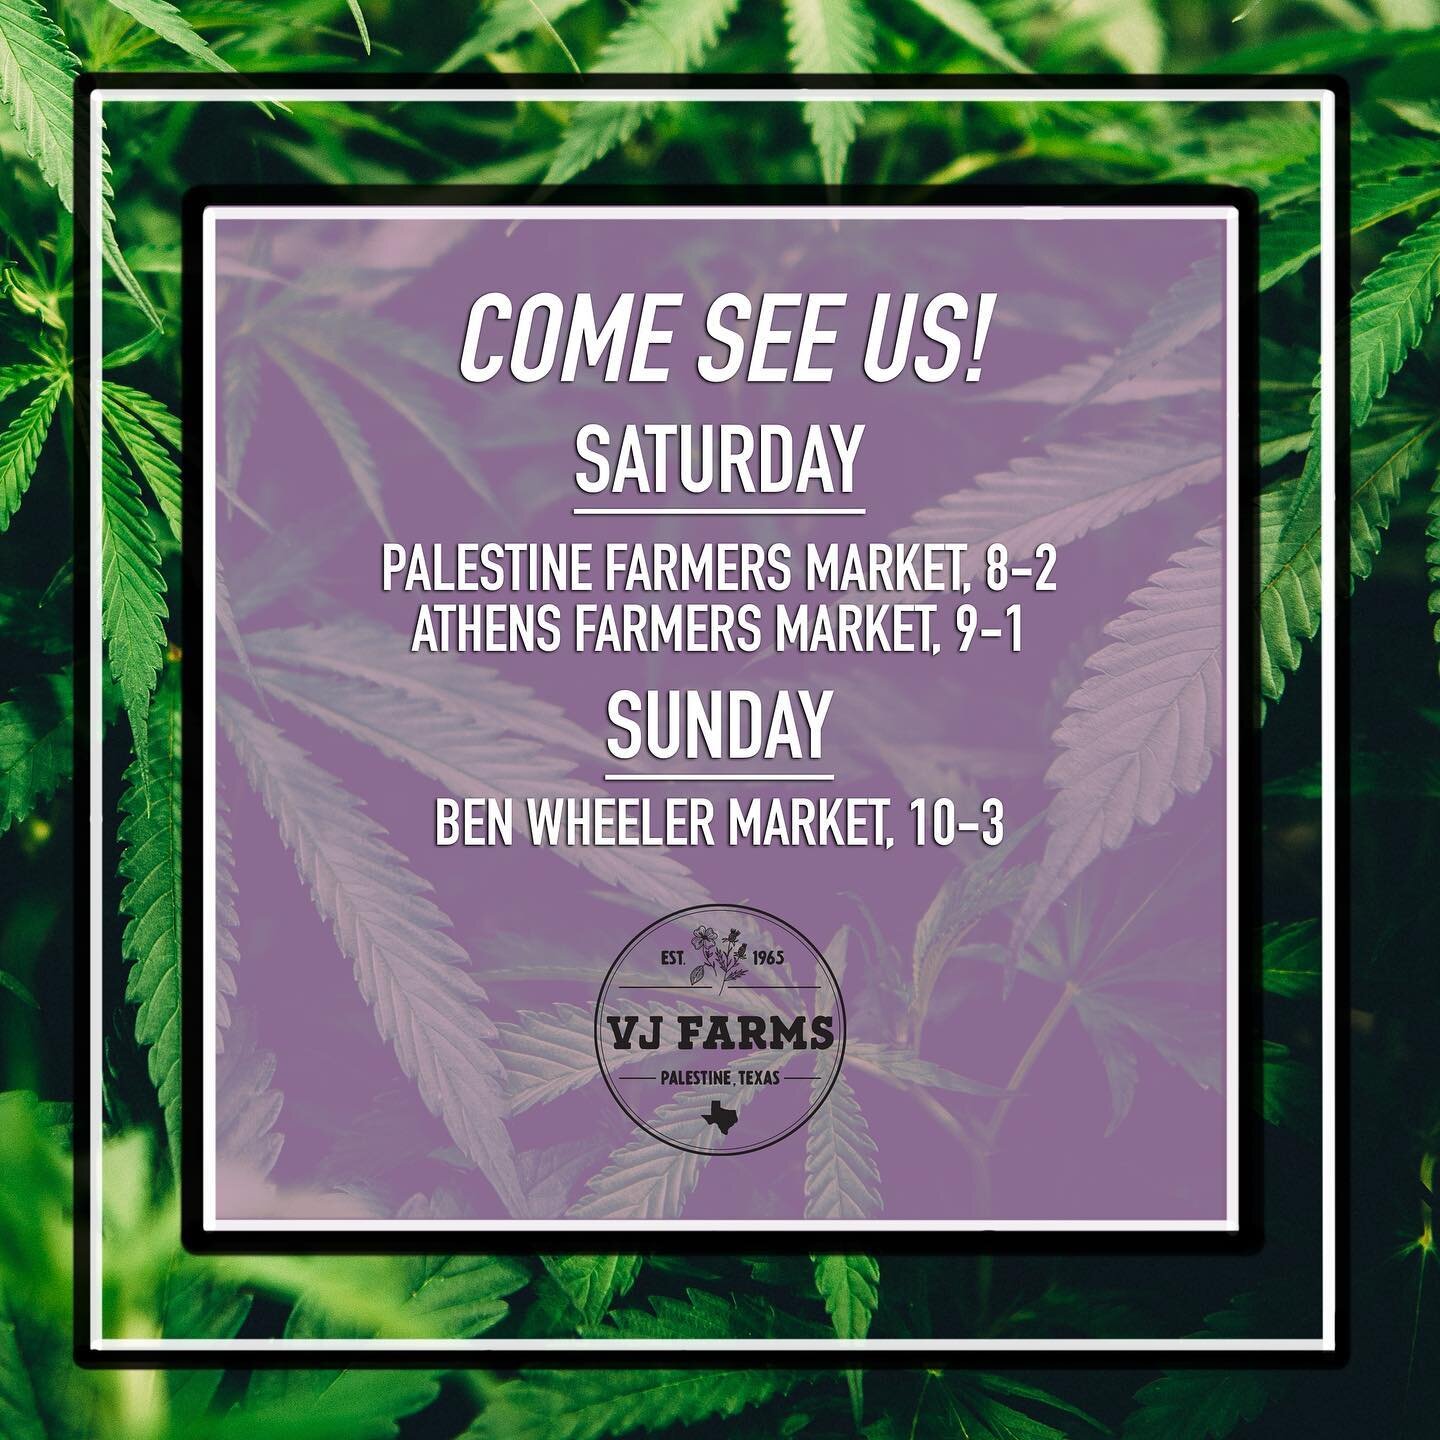 Come stock up on your CBD needs this weekend! 🌿 Find us at @palestinefarmersmarket and @atxfm on Saturday, and at @locally_forged in Ben Wheeler on Sunday. ☀️
If you can&rsquo;t make it you can always purchase from our online store (link in bio). 💚